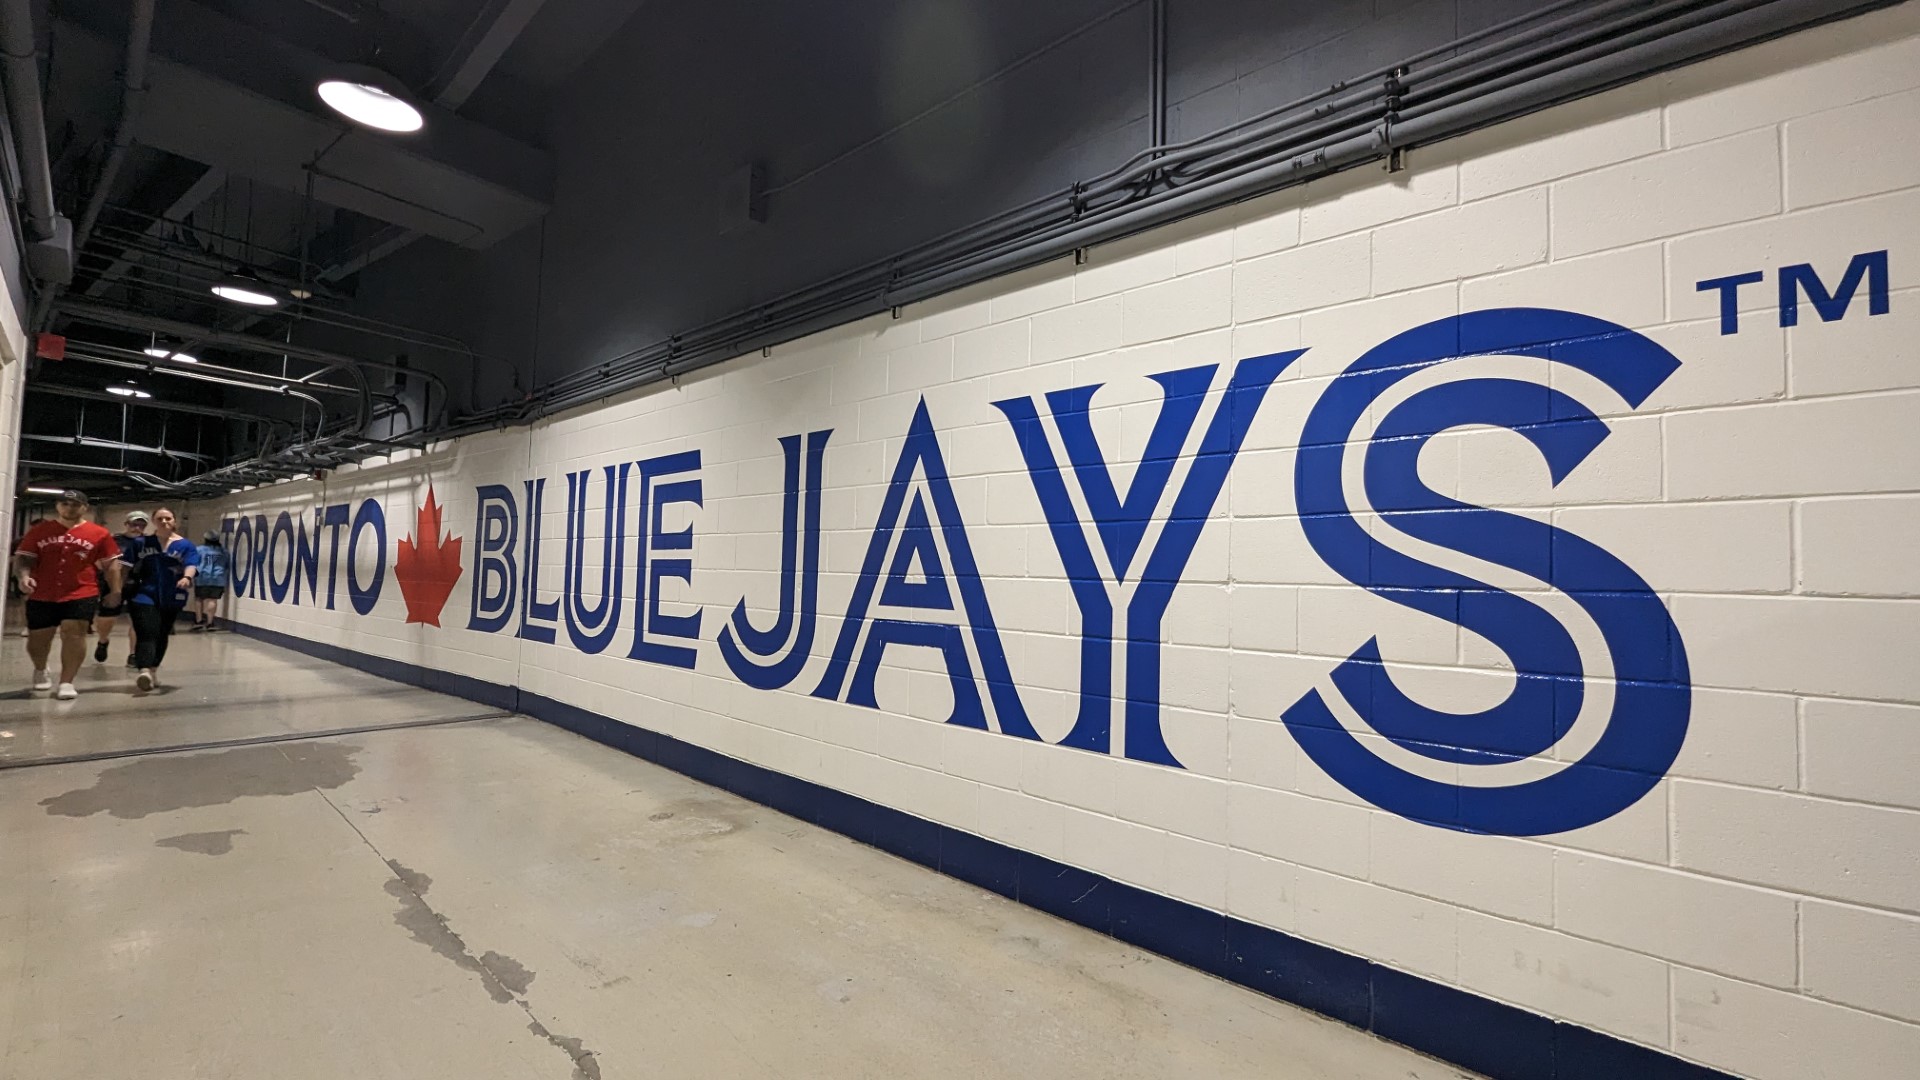 Toronto Blue Jays Store Rogers Centre Store, SAVE 34